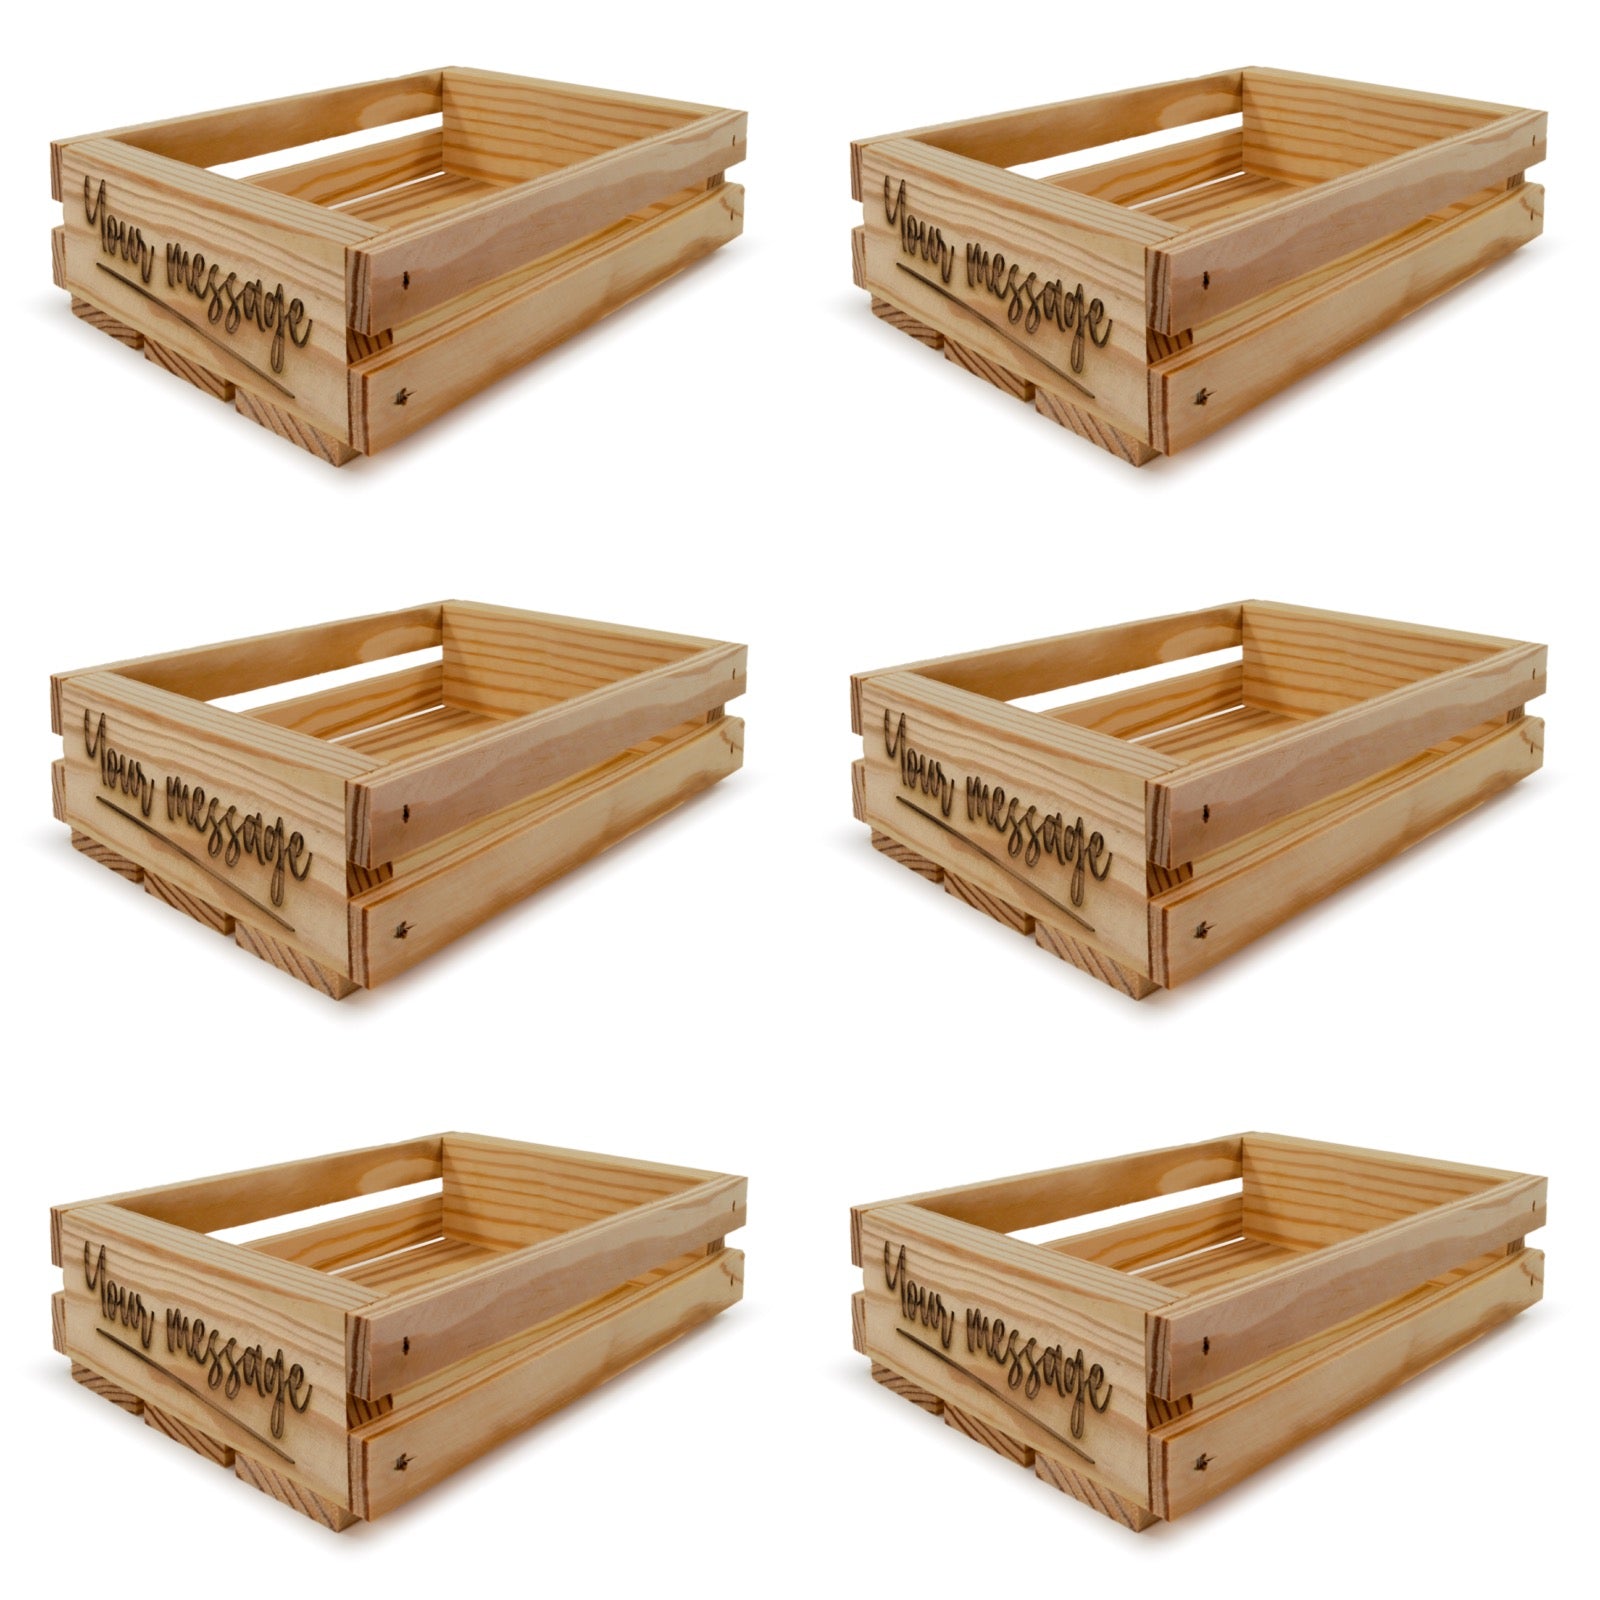 6 Small wooden crates 8x6x2.5 your message included